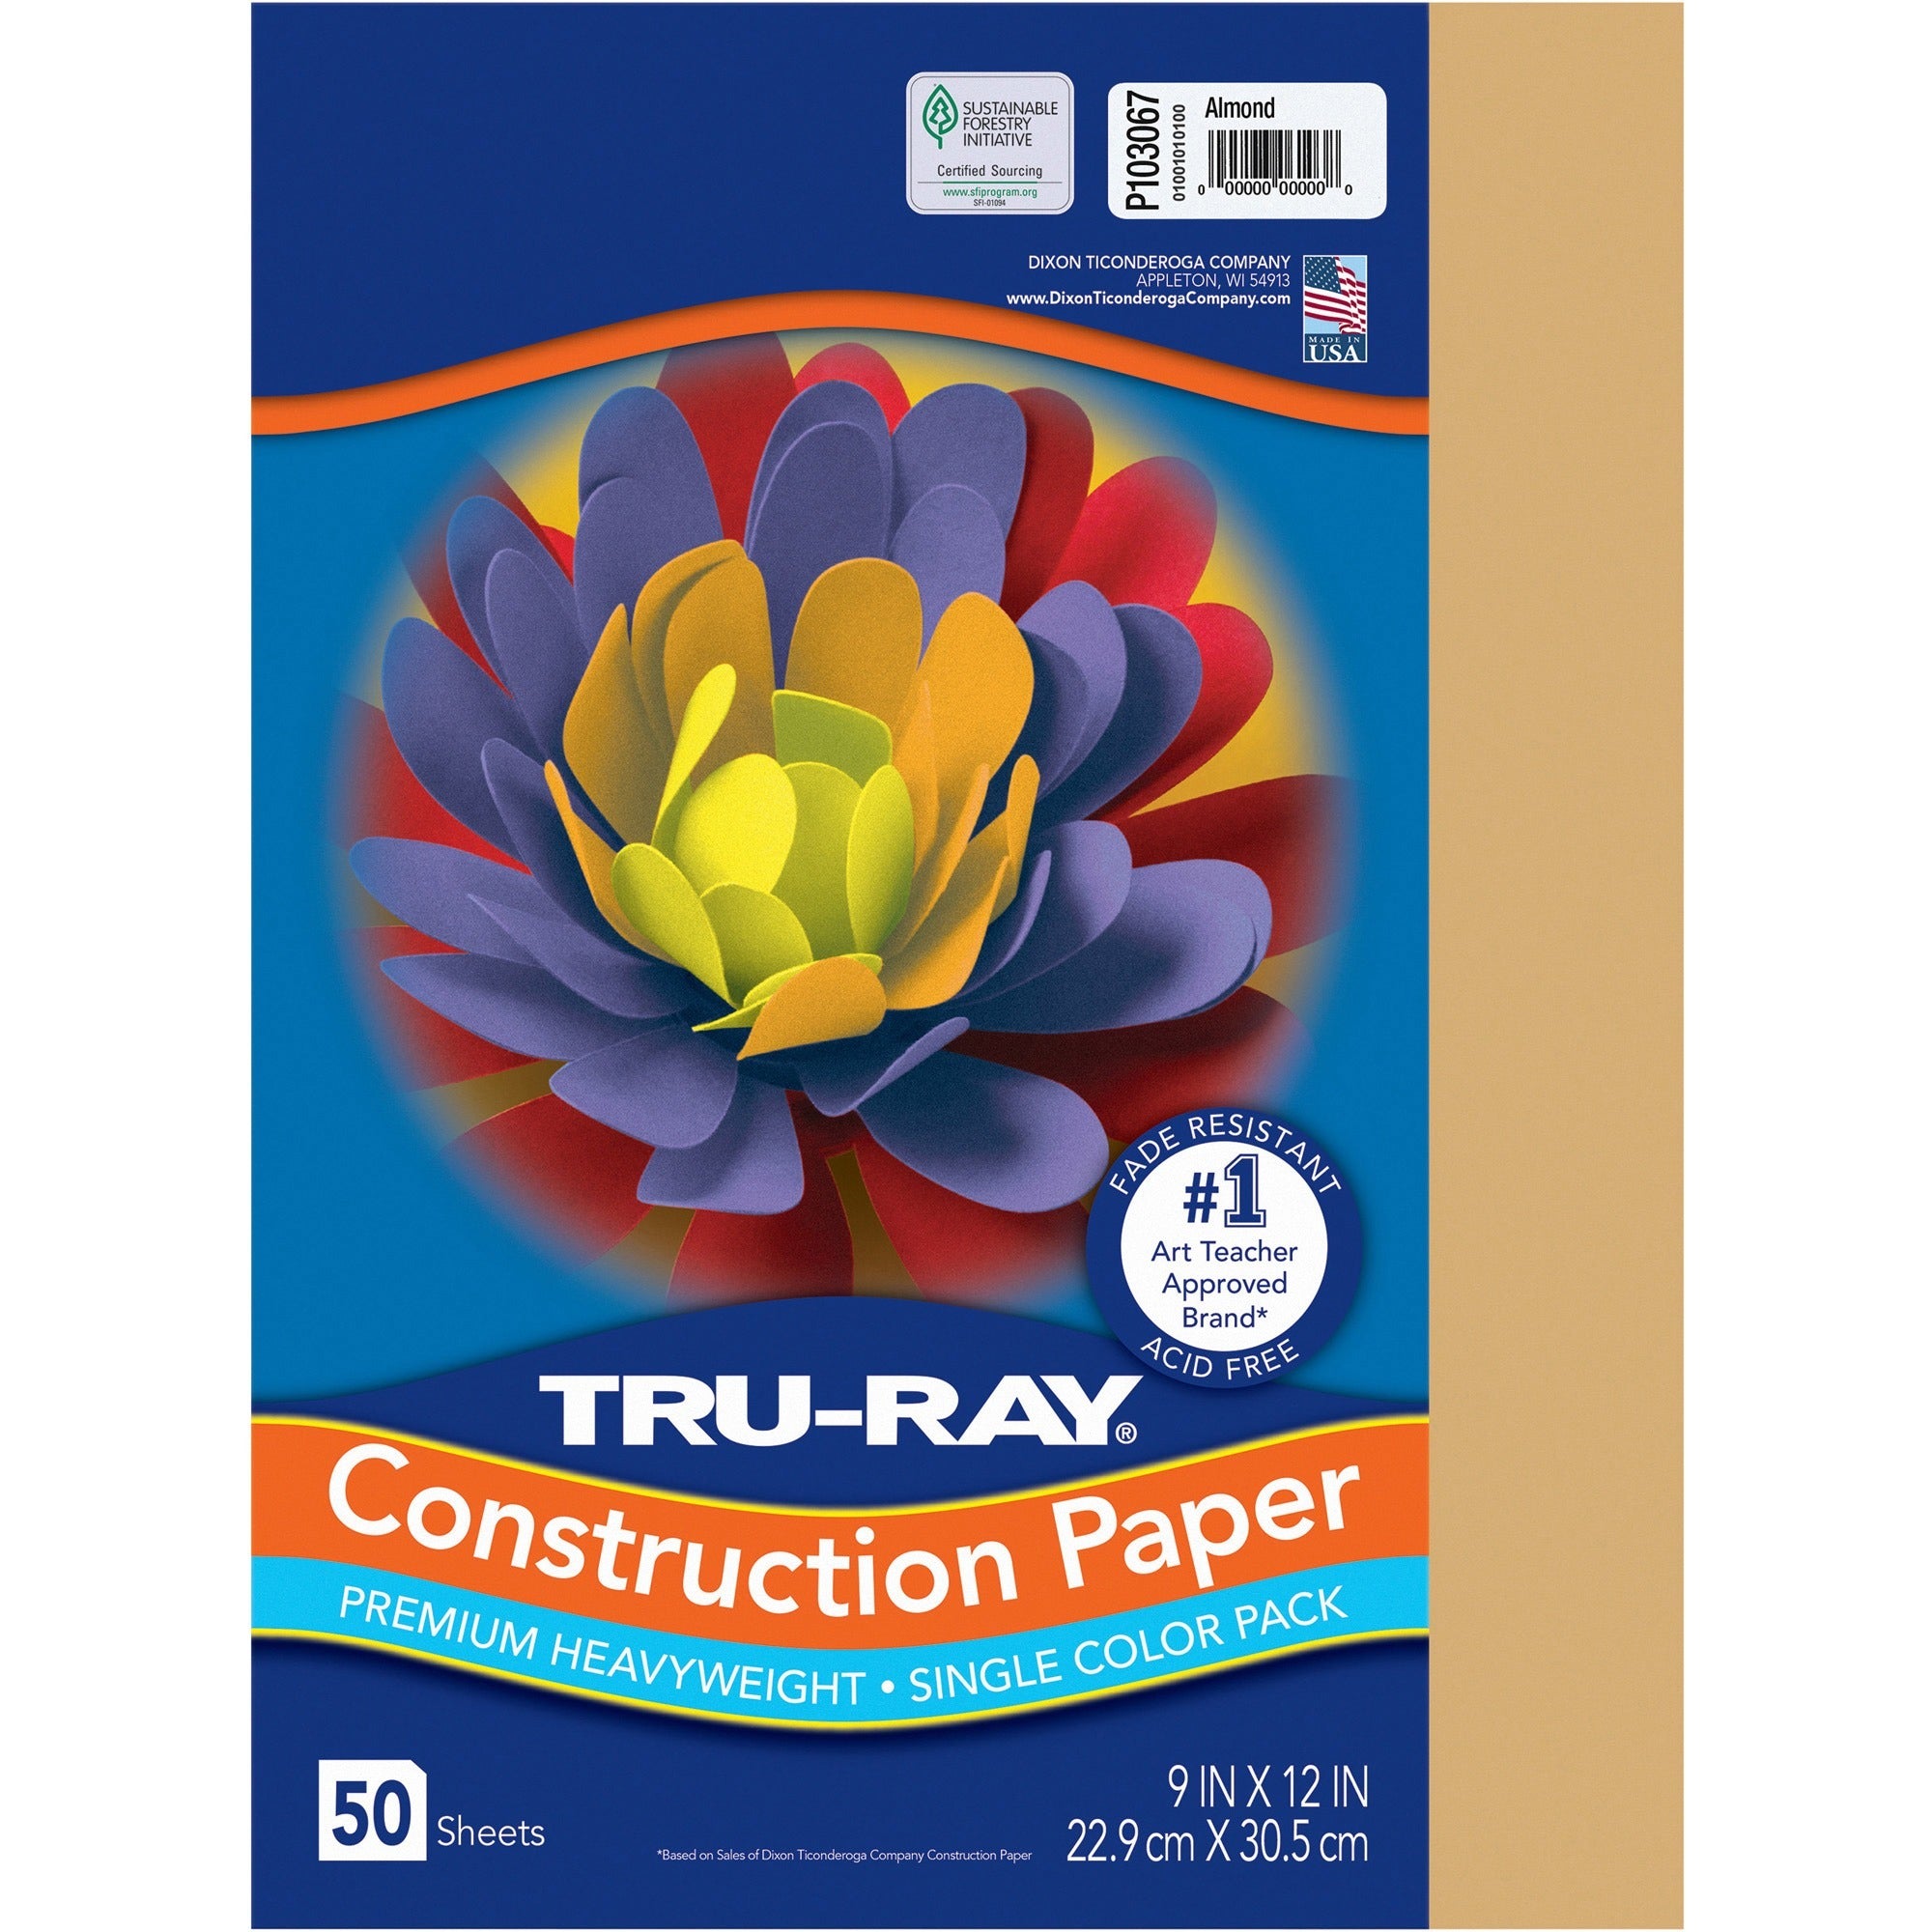 tru-ray-construction-paper-art-project-craft-project-9width-x-12length-76-lb-basis-weight-50-pack-almond-fiber-sulphite_pacp103067 - 1